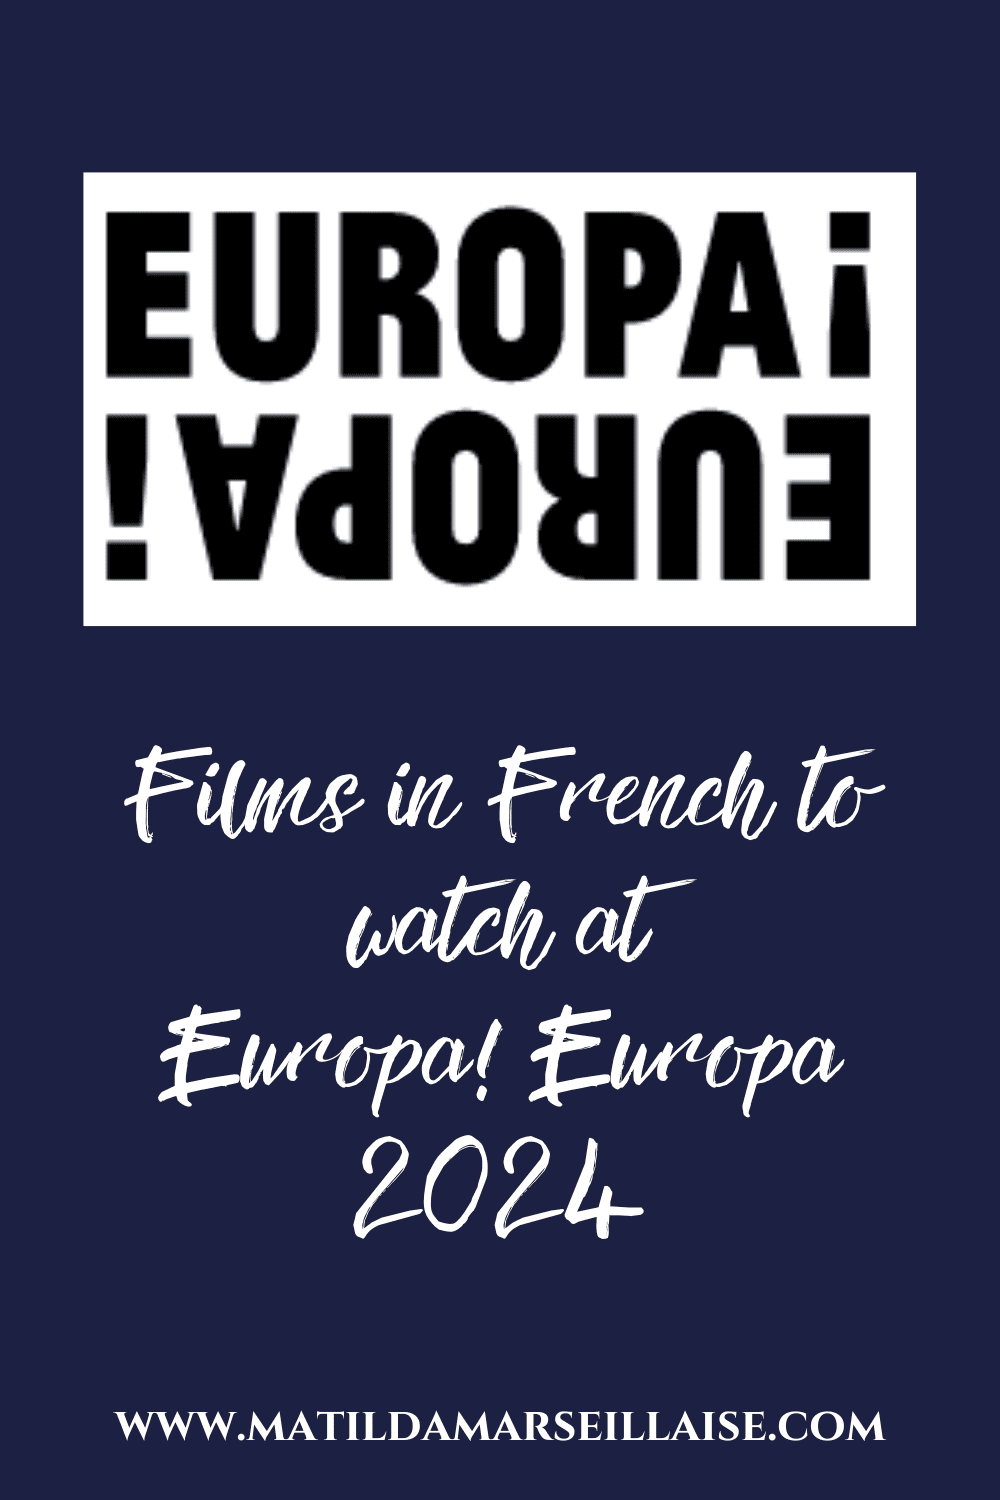 Europa! Europa 2024 hits cinemas this week with an exciting lineup of French and other European films